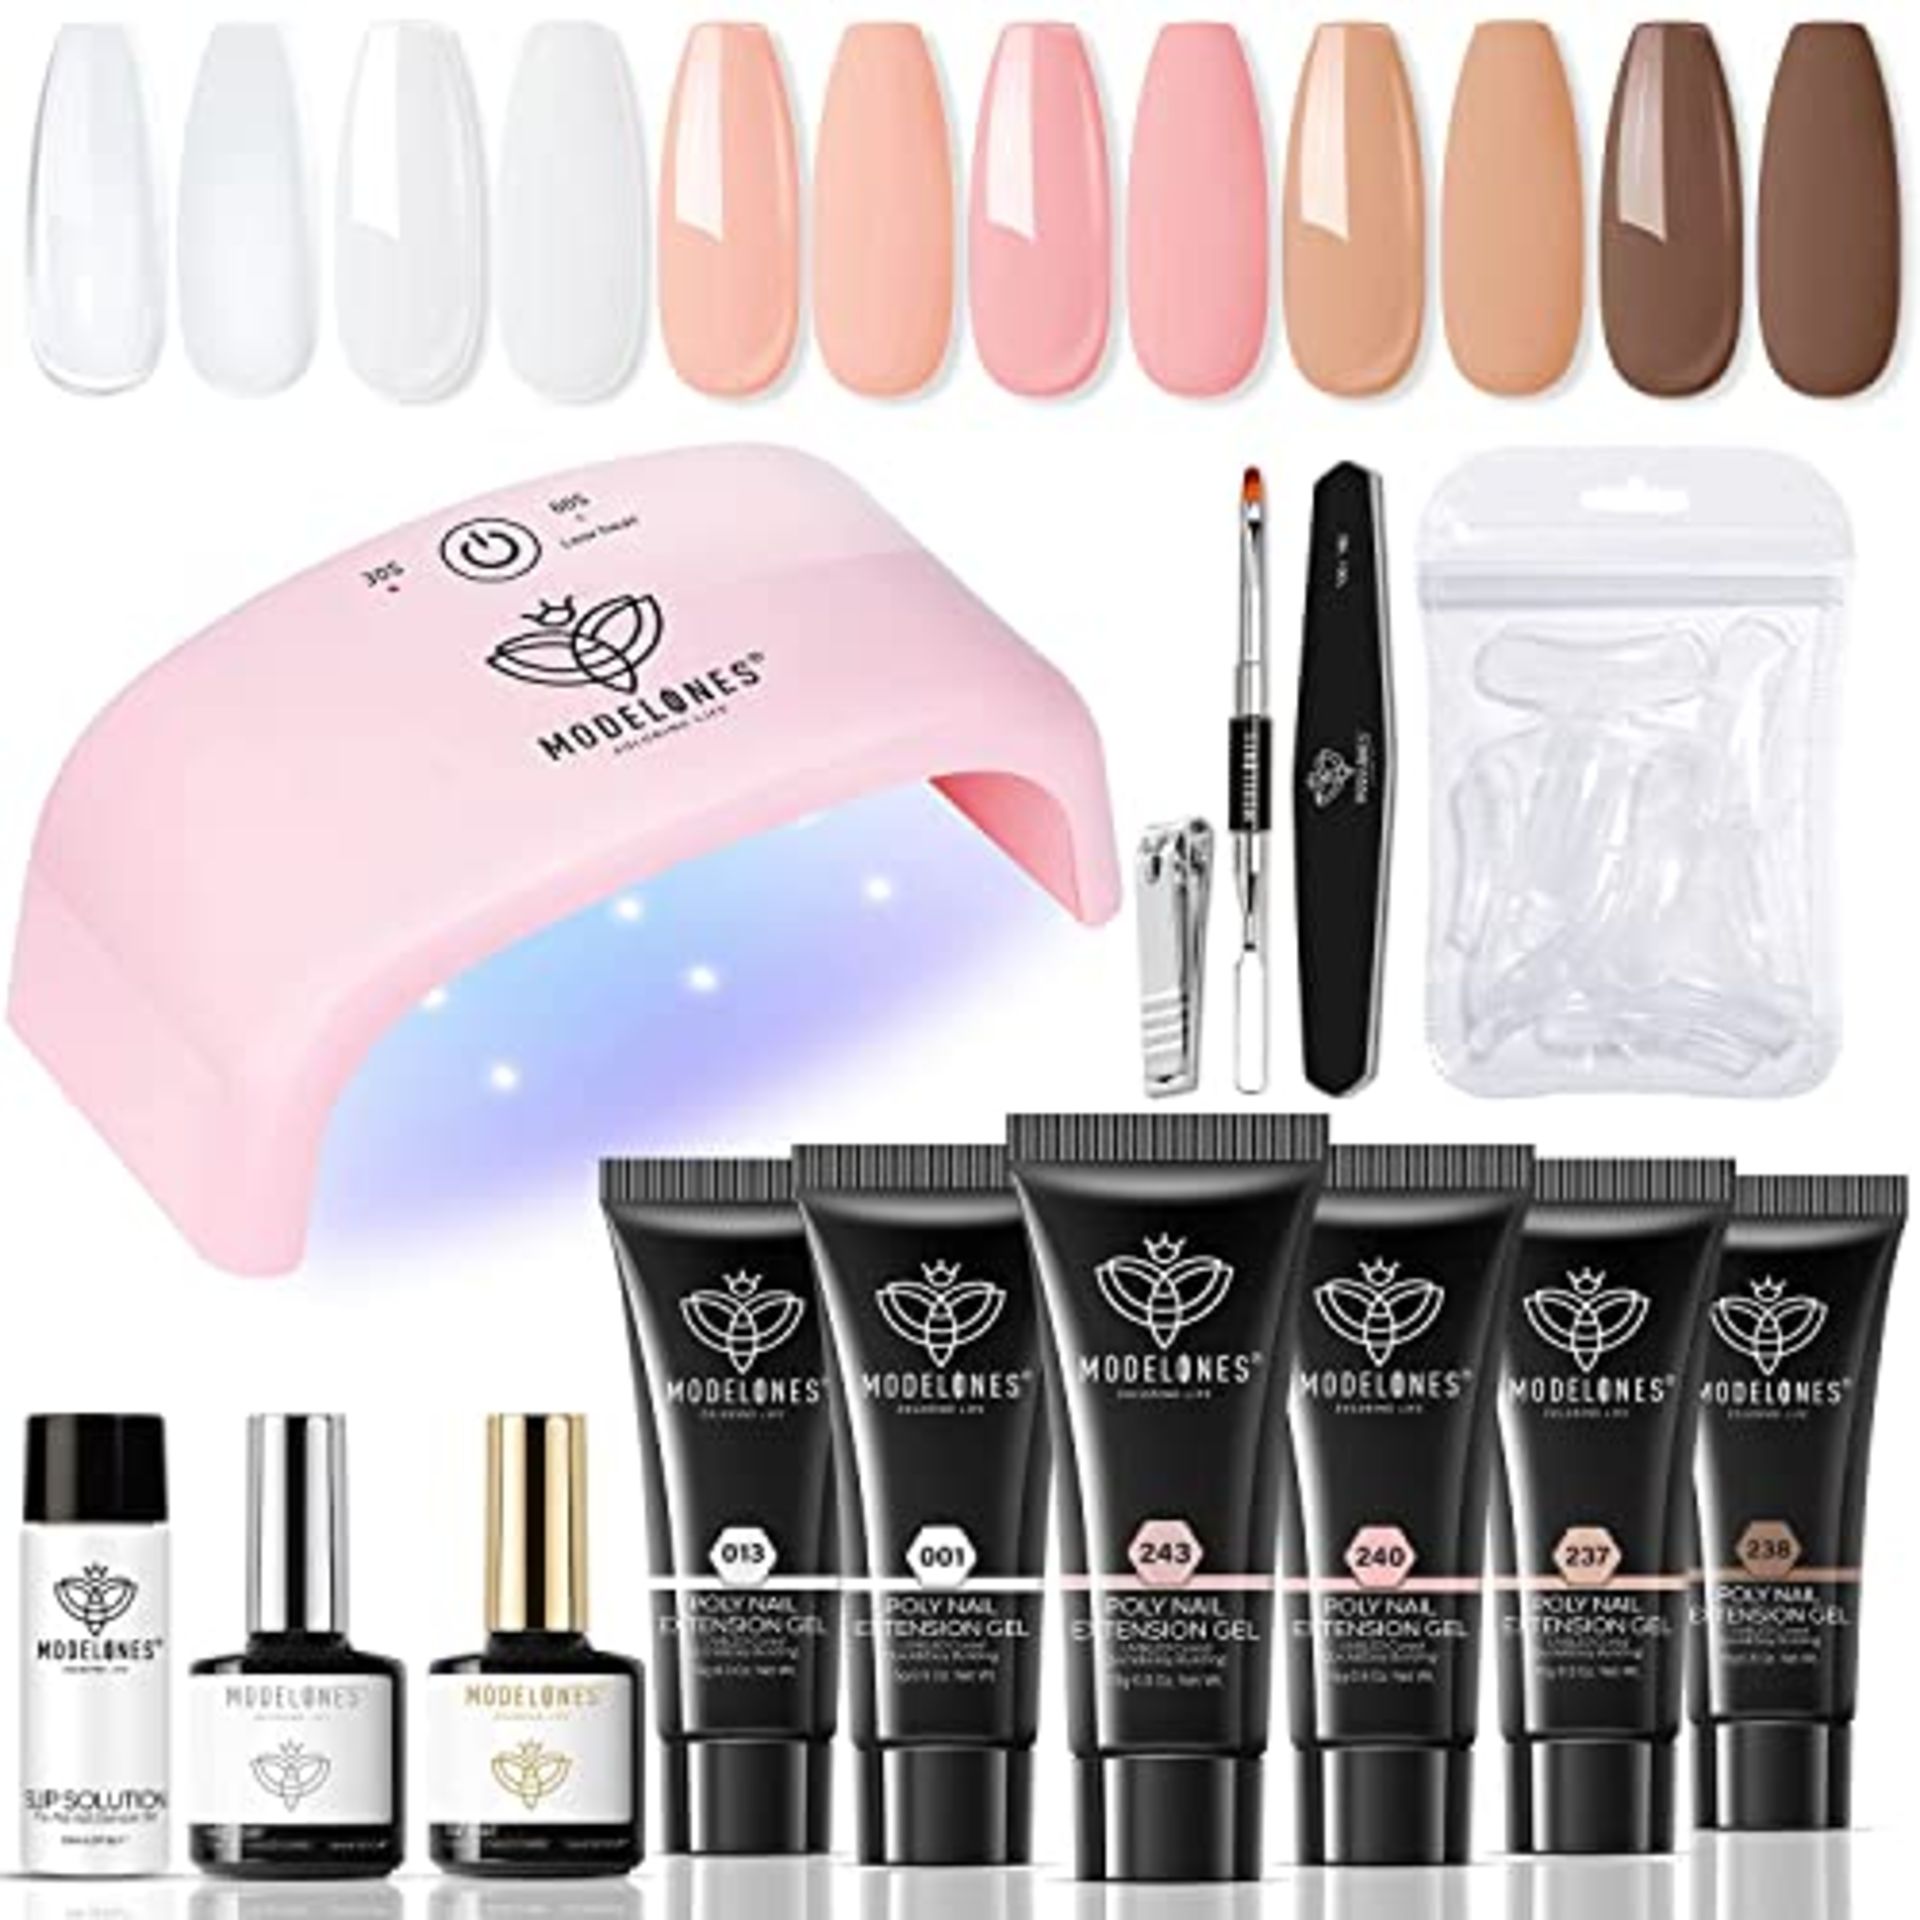 RRP £52.50 Total, Lot consisting of 2 items - See description.